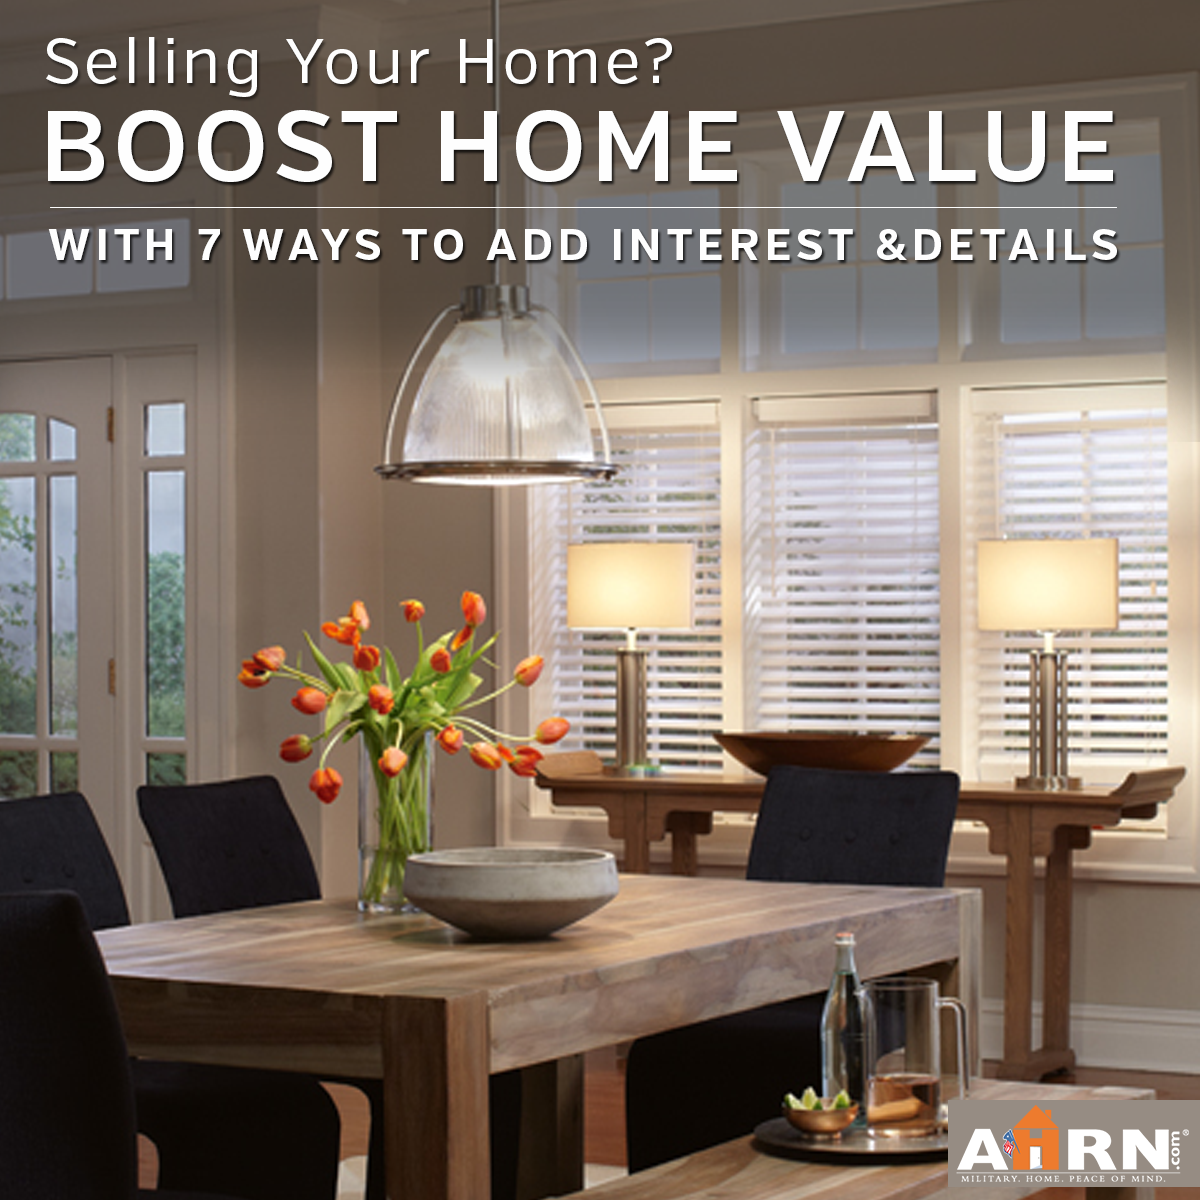 How to Increase Home Value With Easy Renovations